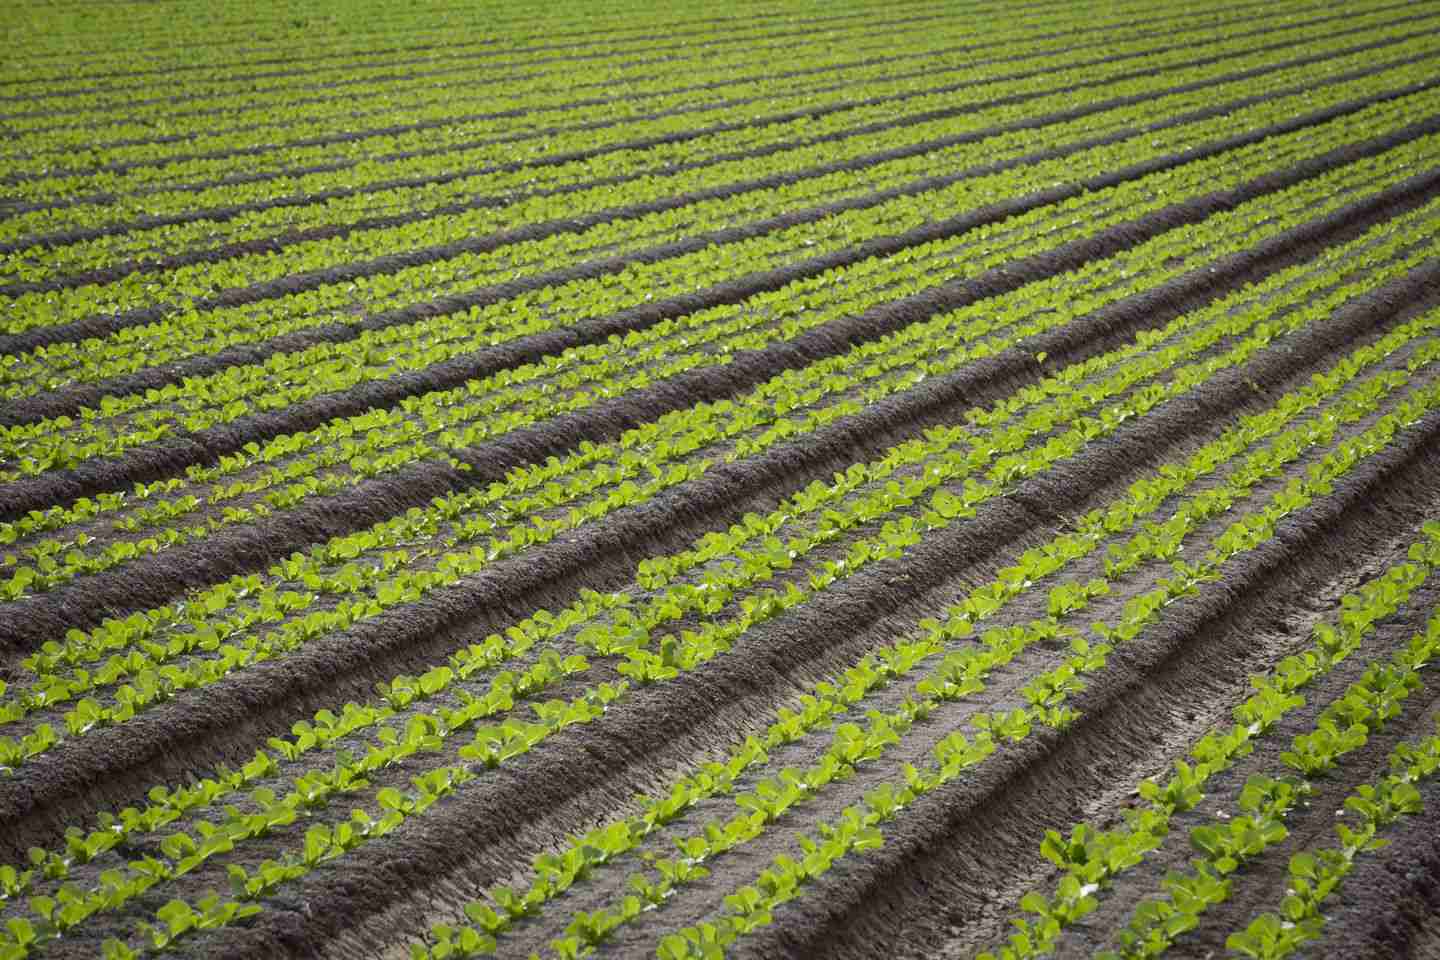 Romaine lettuce grew near Yuma, Ariz., one of the nation’s leading producers of leafy green vegetables. At least one recent E. coli outbreak has been traced to farms in the region.